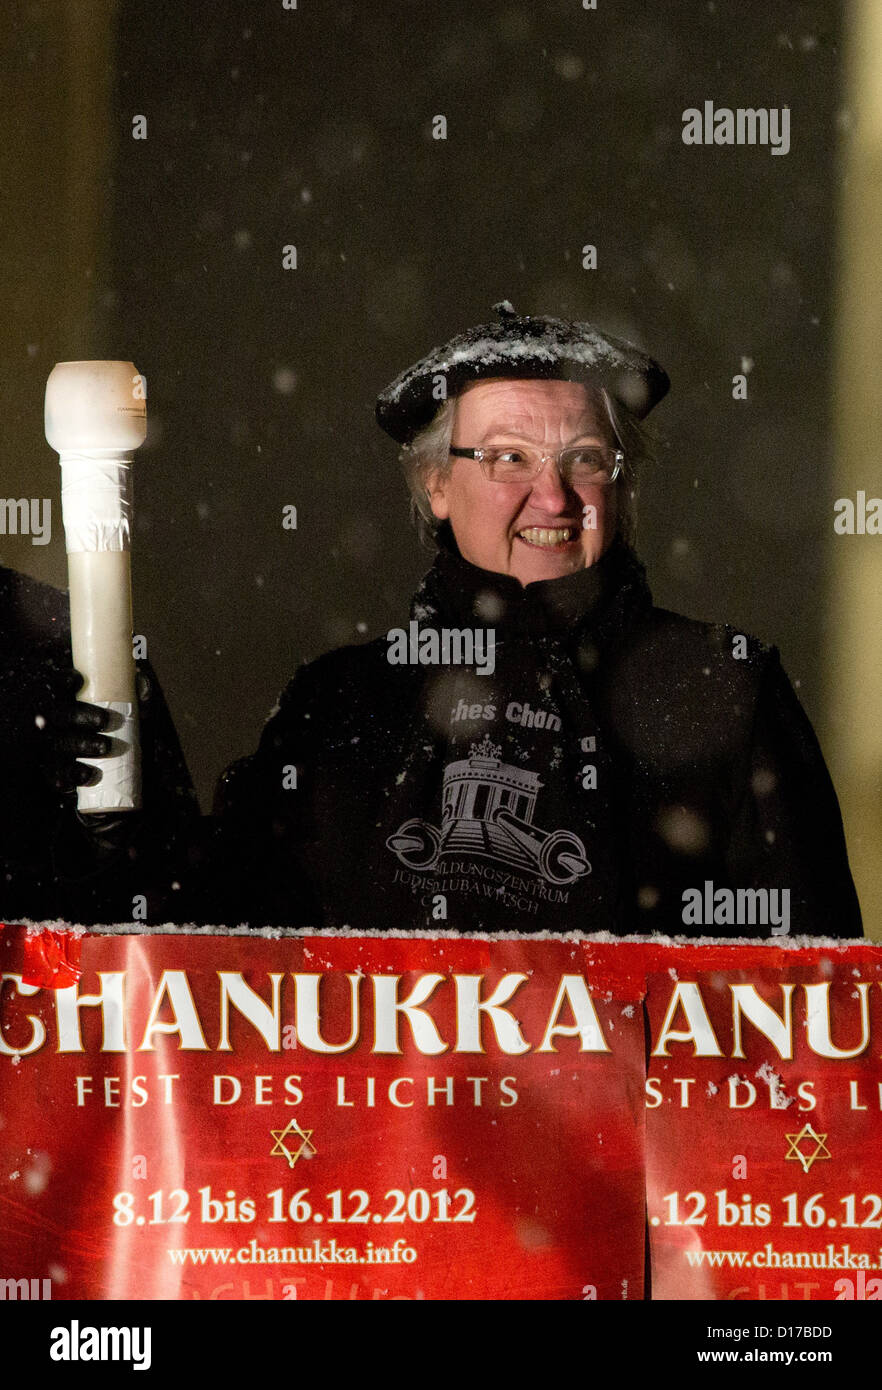 German Education and Research Minister Annette Schavan holds a candle at the Brandenburg Gate in Berlin, Germany, 09 december 2012. The Jewish holiday commemorates the rededication of the Holy Temple in Jerusalem in the 2nd century BCE. Photo: JOERG CARSTENSEN Stock Photo